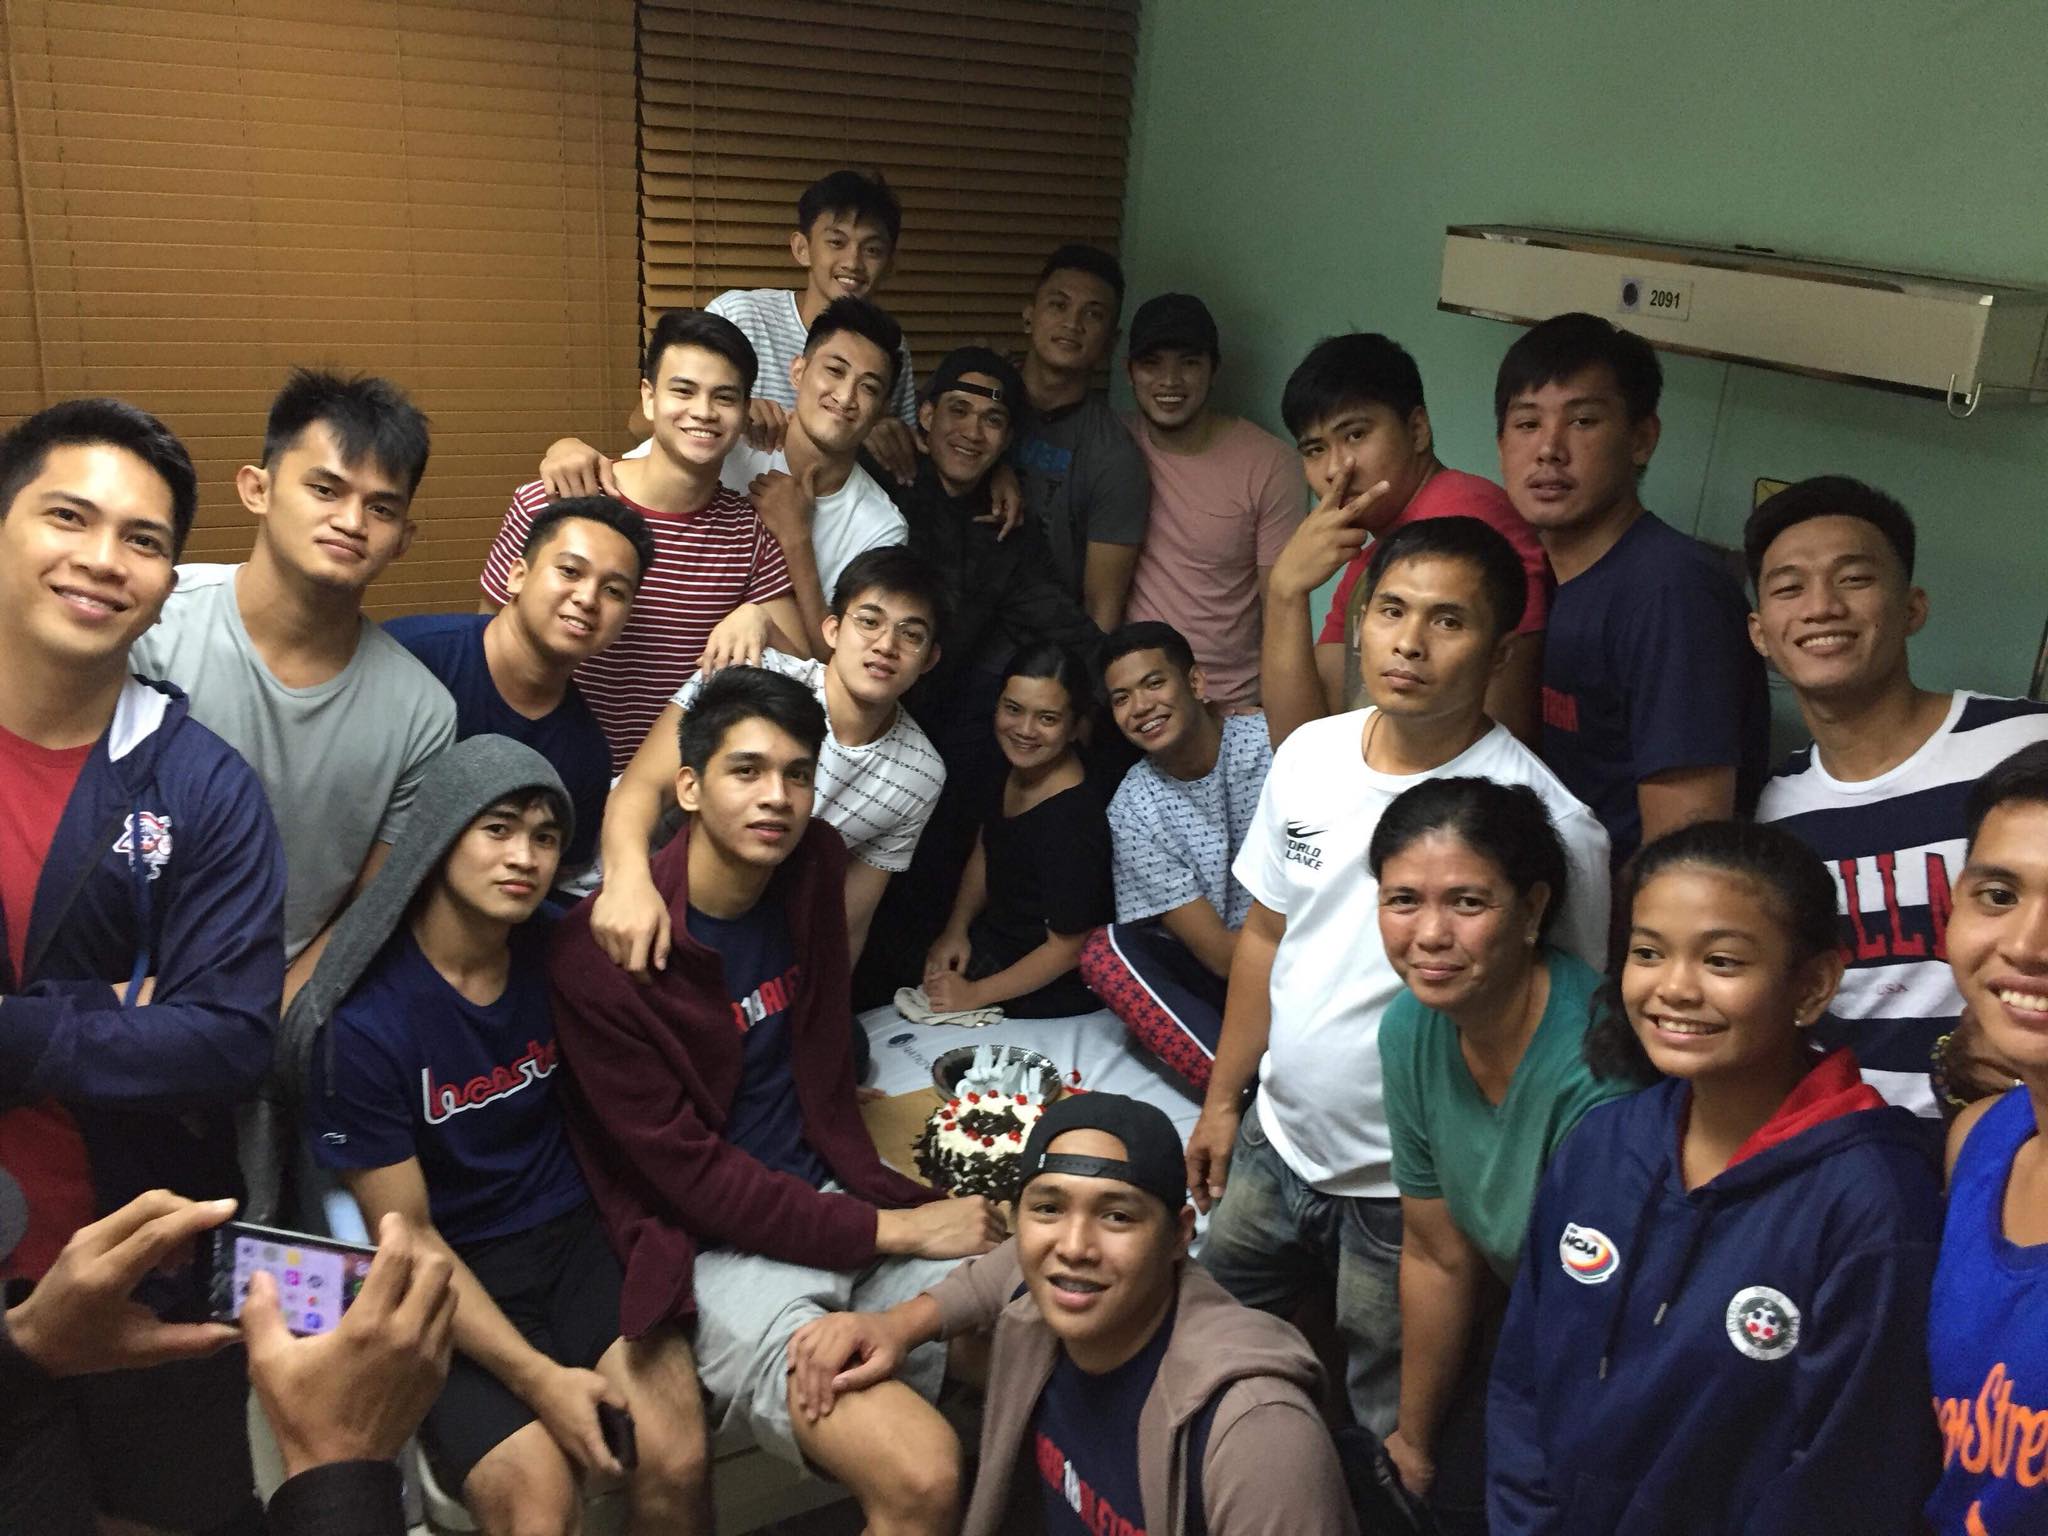 The Letran team paid Jerrick Balanza a visit after their win yesterday against Arellano to celebrate his birthday | Photo courtesy of Gelay Davocol